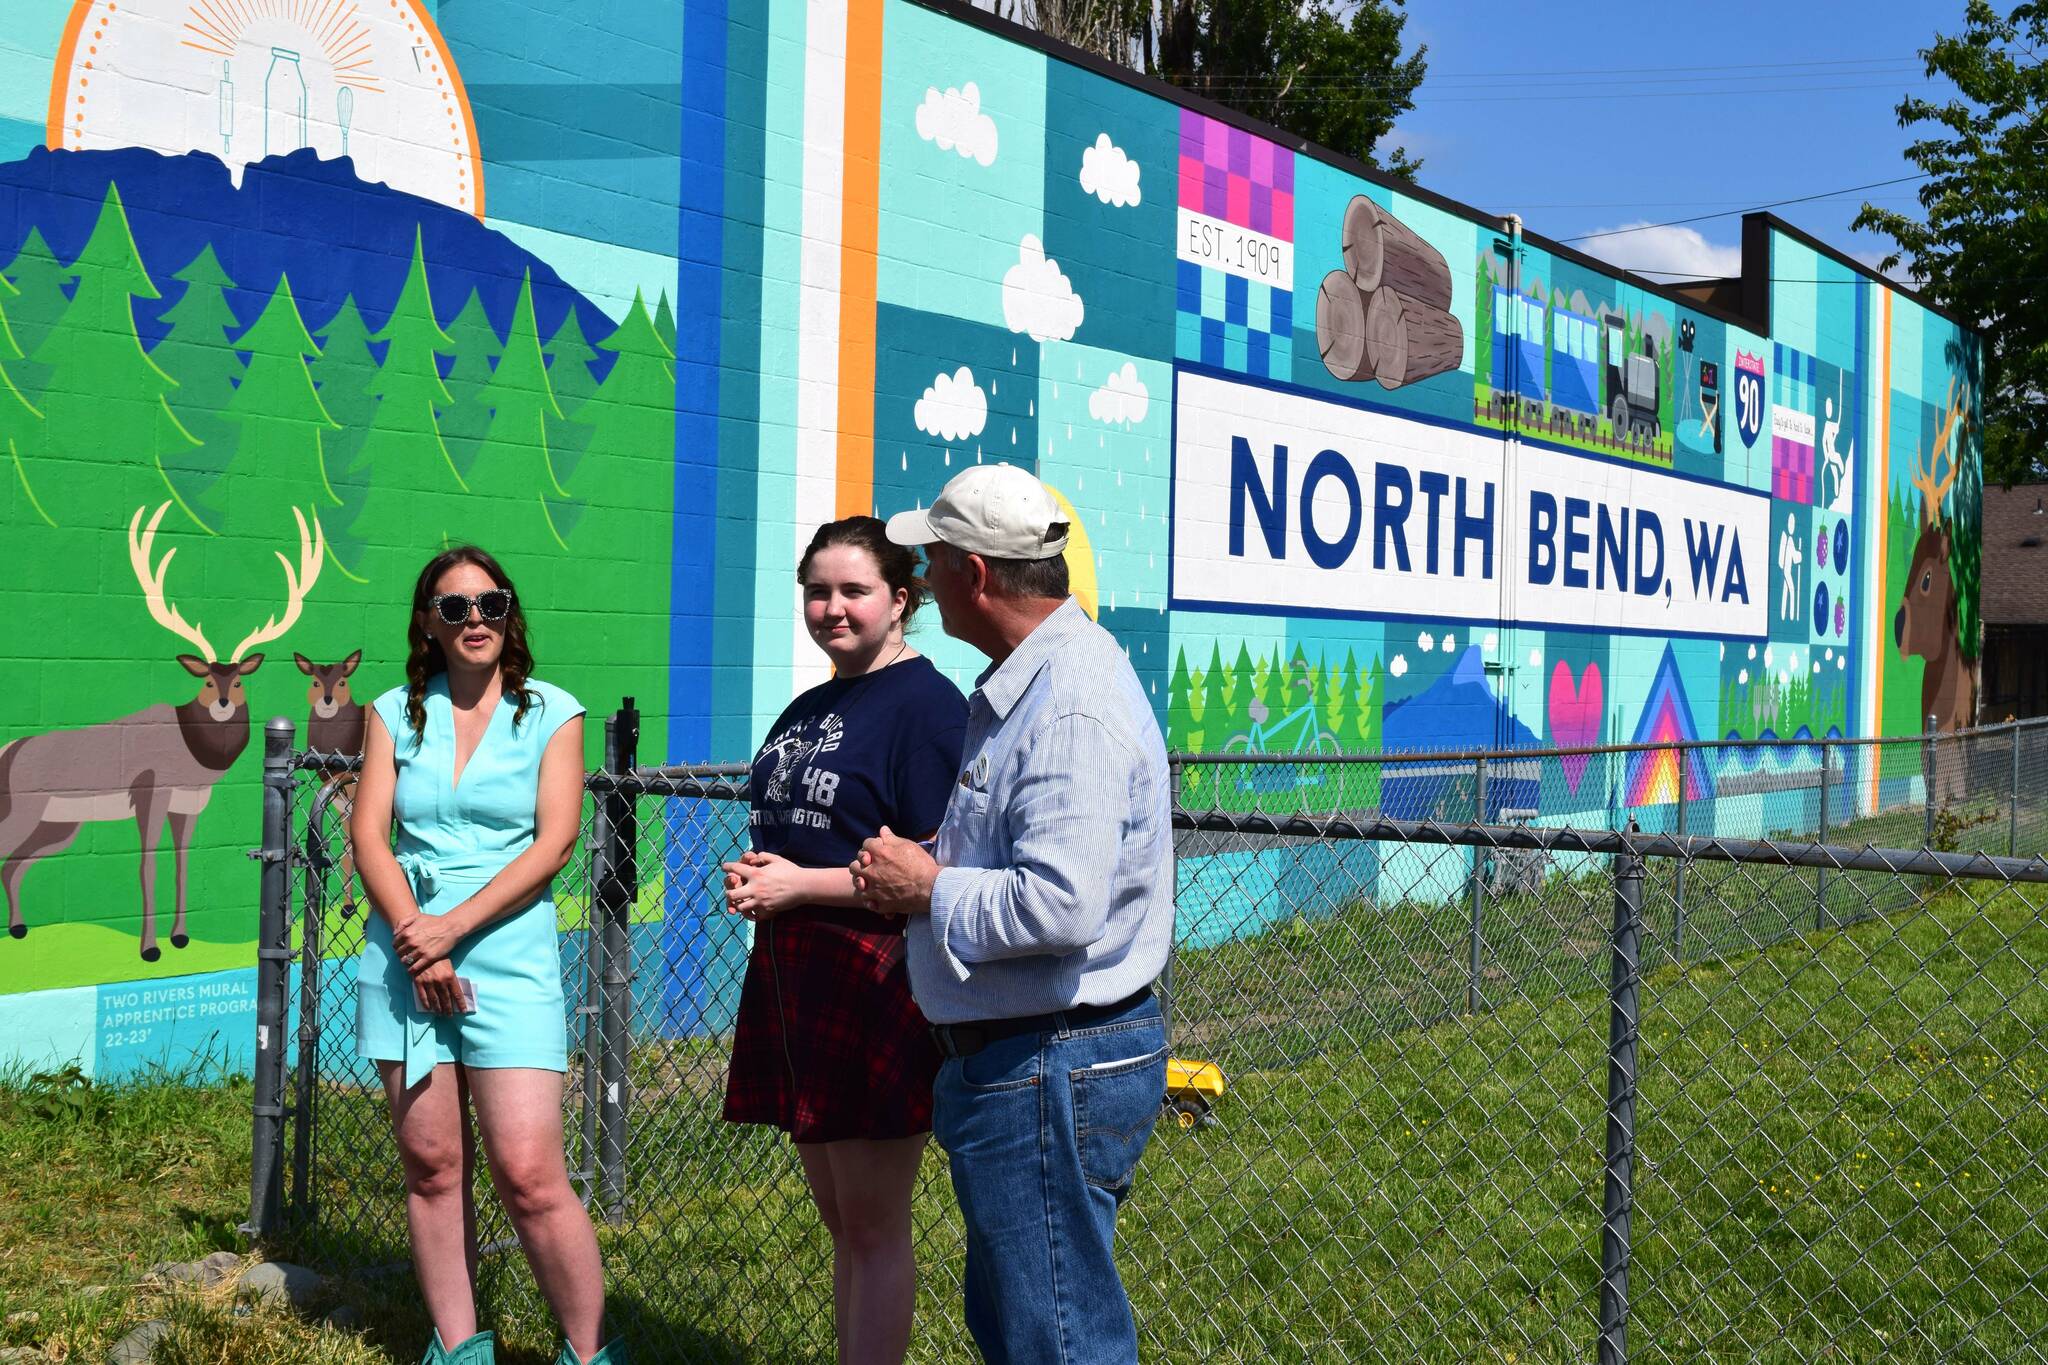 Photo by Conor Wilson/Valley Record
Sarah Hughes, left, unveils her mural in June alongside Ava Mulligan, a Two Rivers High School Student, and North Bend Mayor Rob McFarland.